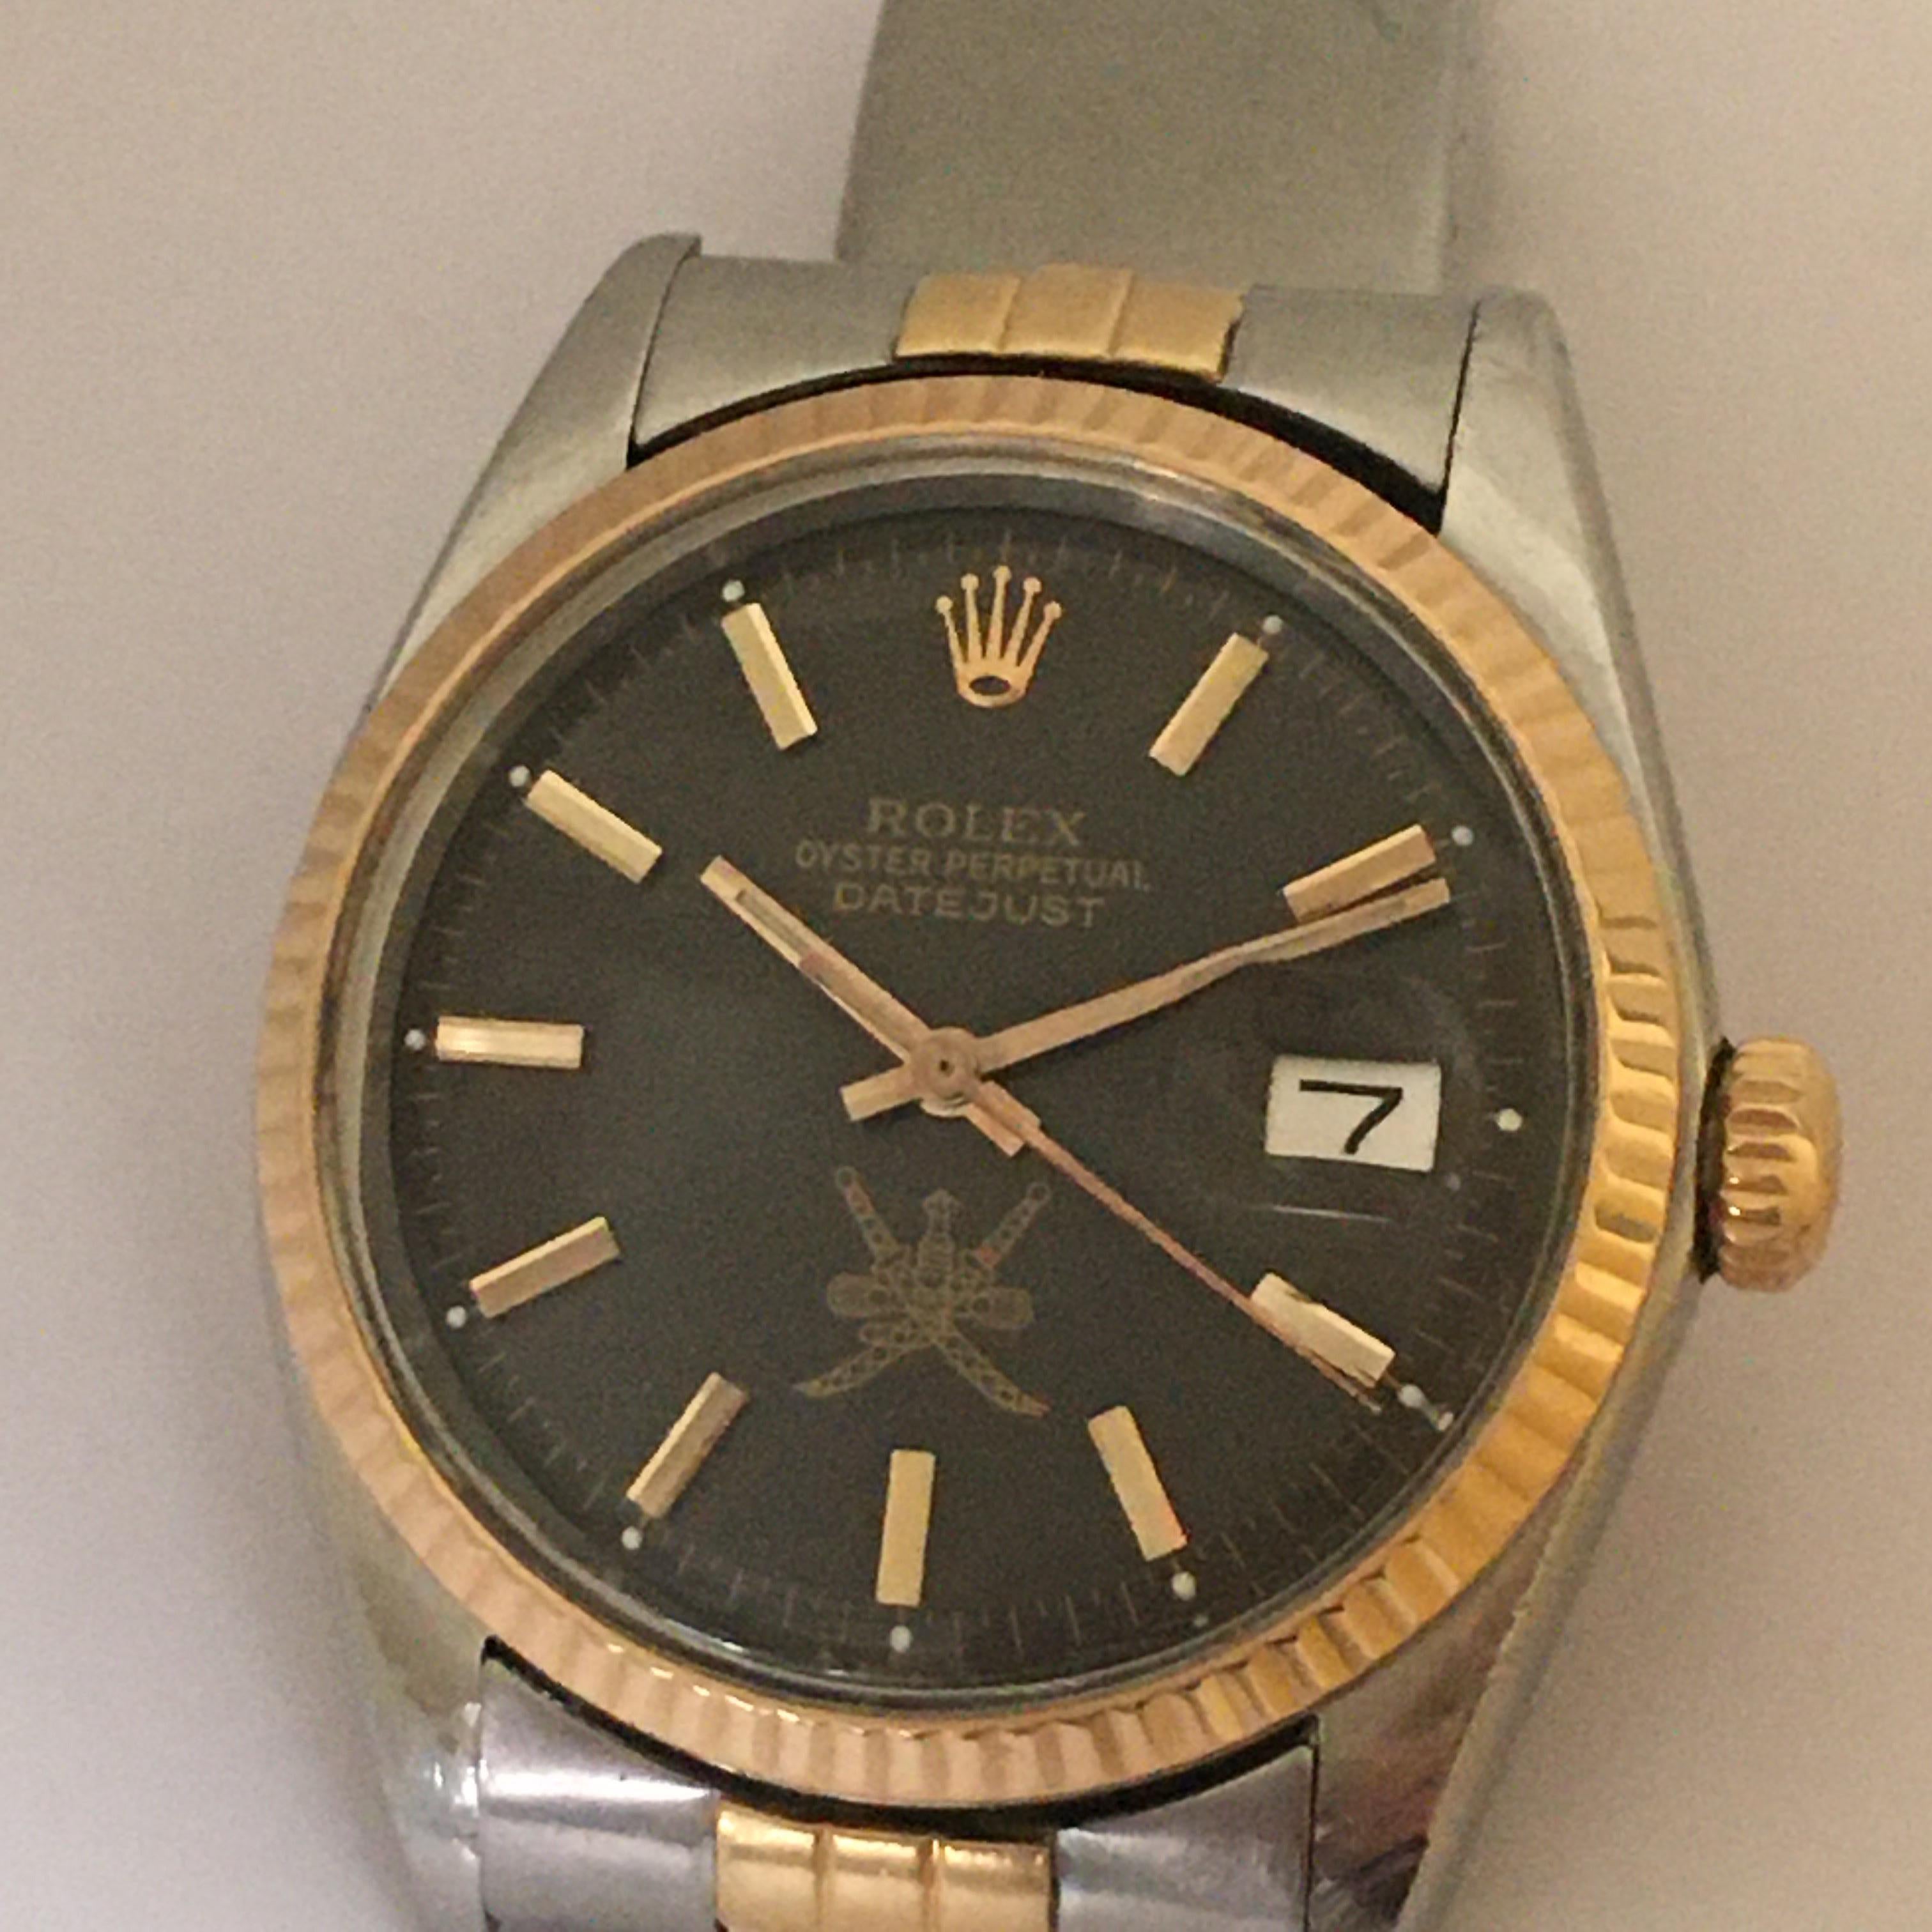 1974 Gent's Rolex Date Just Khanjar Black خنجر Dial 18K Two Tone Watch Ref 1603 For Sale 3